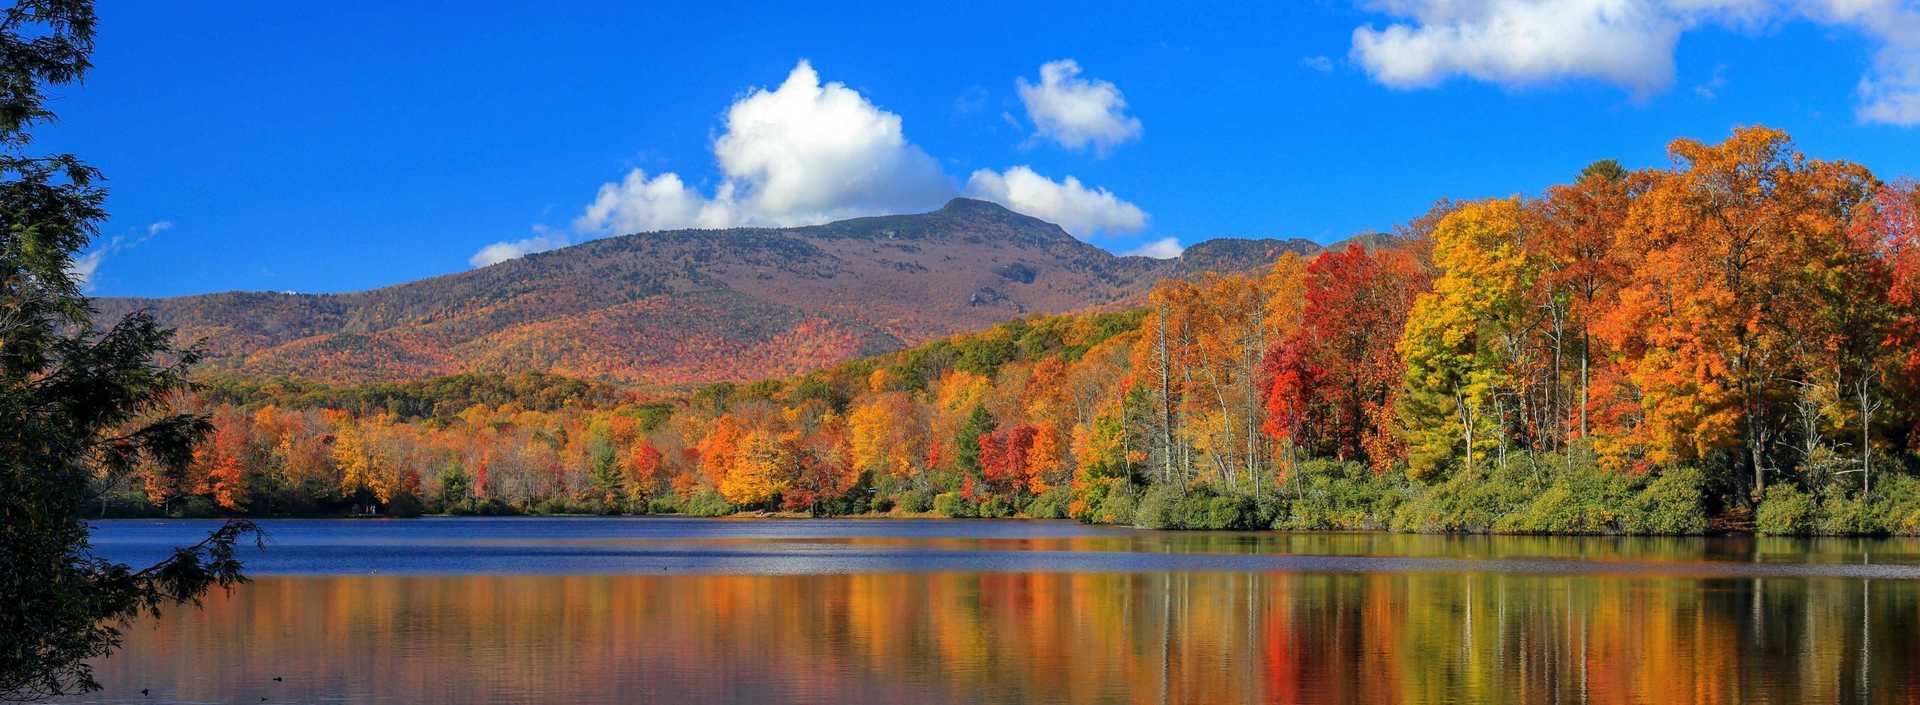 Autumn Colors At Price Lake, Located Along The Blue Ridge Parkway